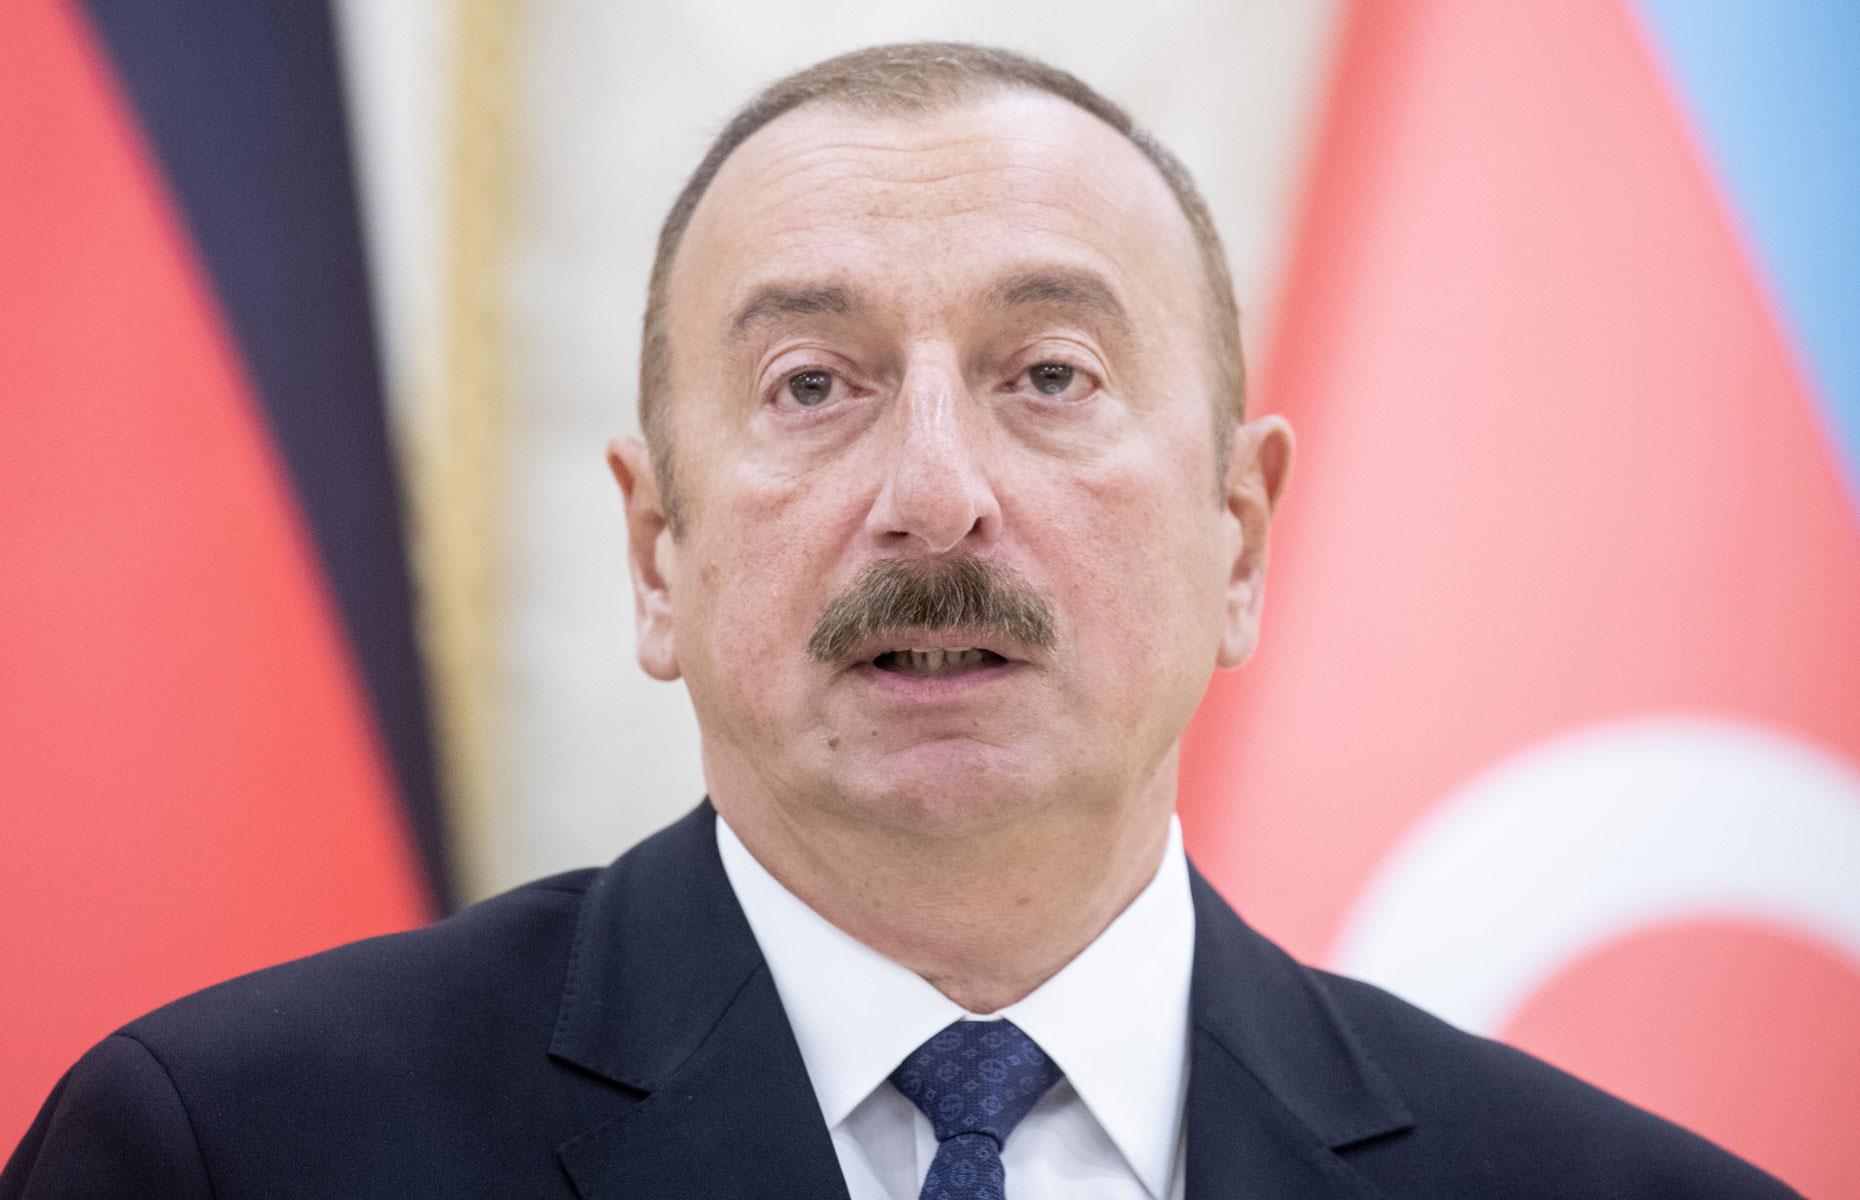 <p>Autocratic leader Ilham Aliyev has been the president of Azerbaijan since 2003. Along with curtailing free speech in the country, the anti-democratic politician has been accused of embezzling billions and is said to control several ostensibly state-owned companies as well as sizeable assets in the nation's largest banks. Overall, his net worth is estimated at more than $3 billion.</p>